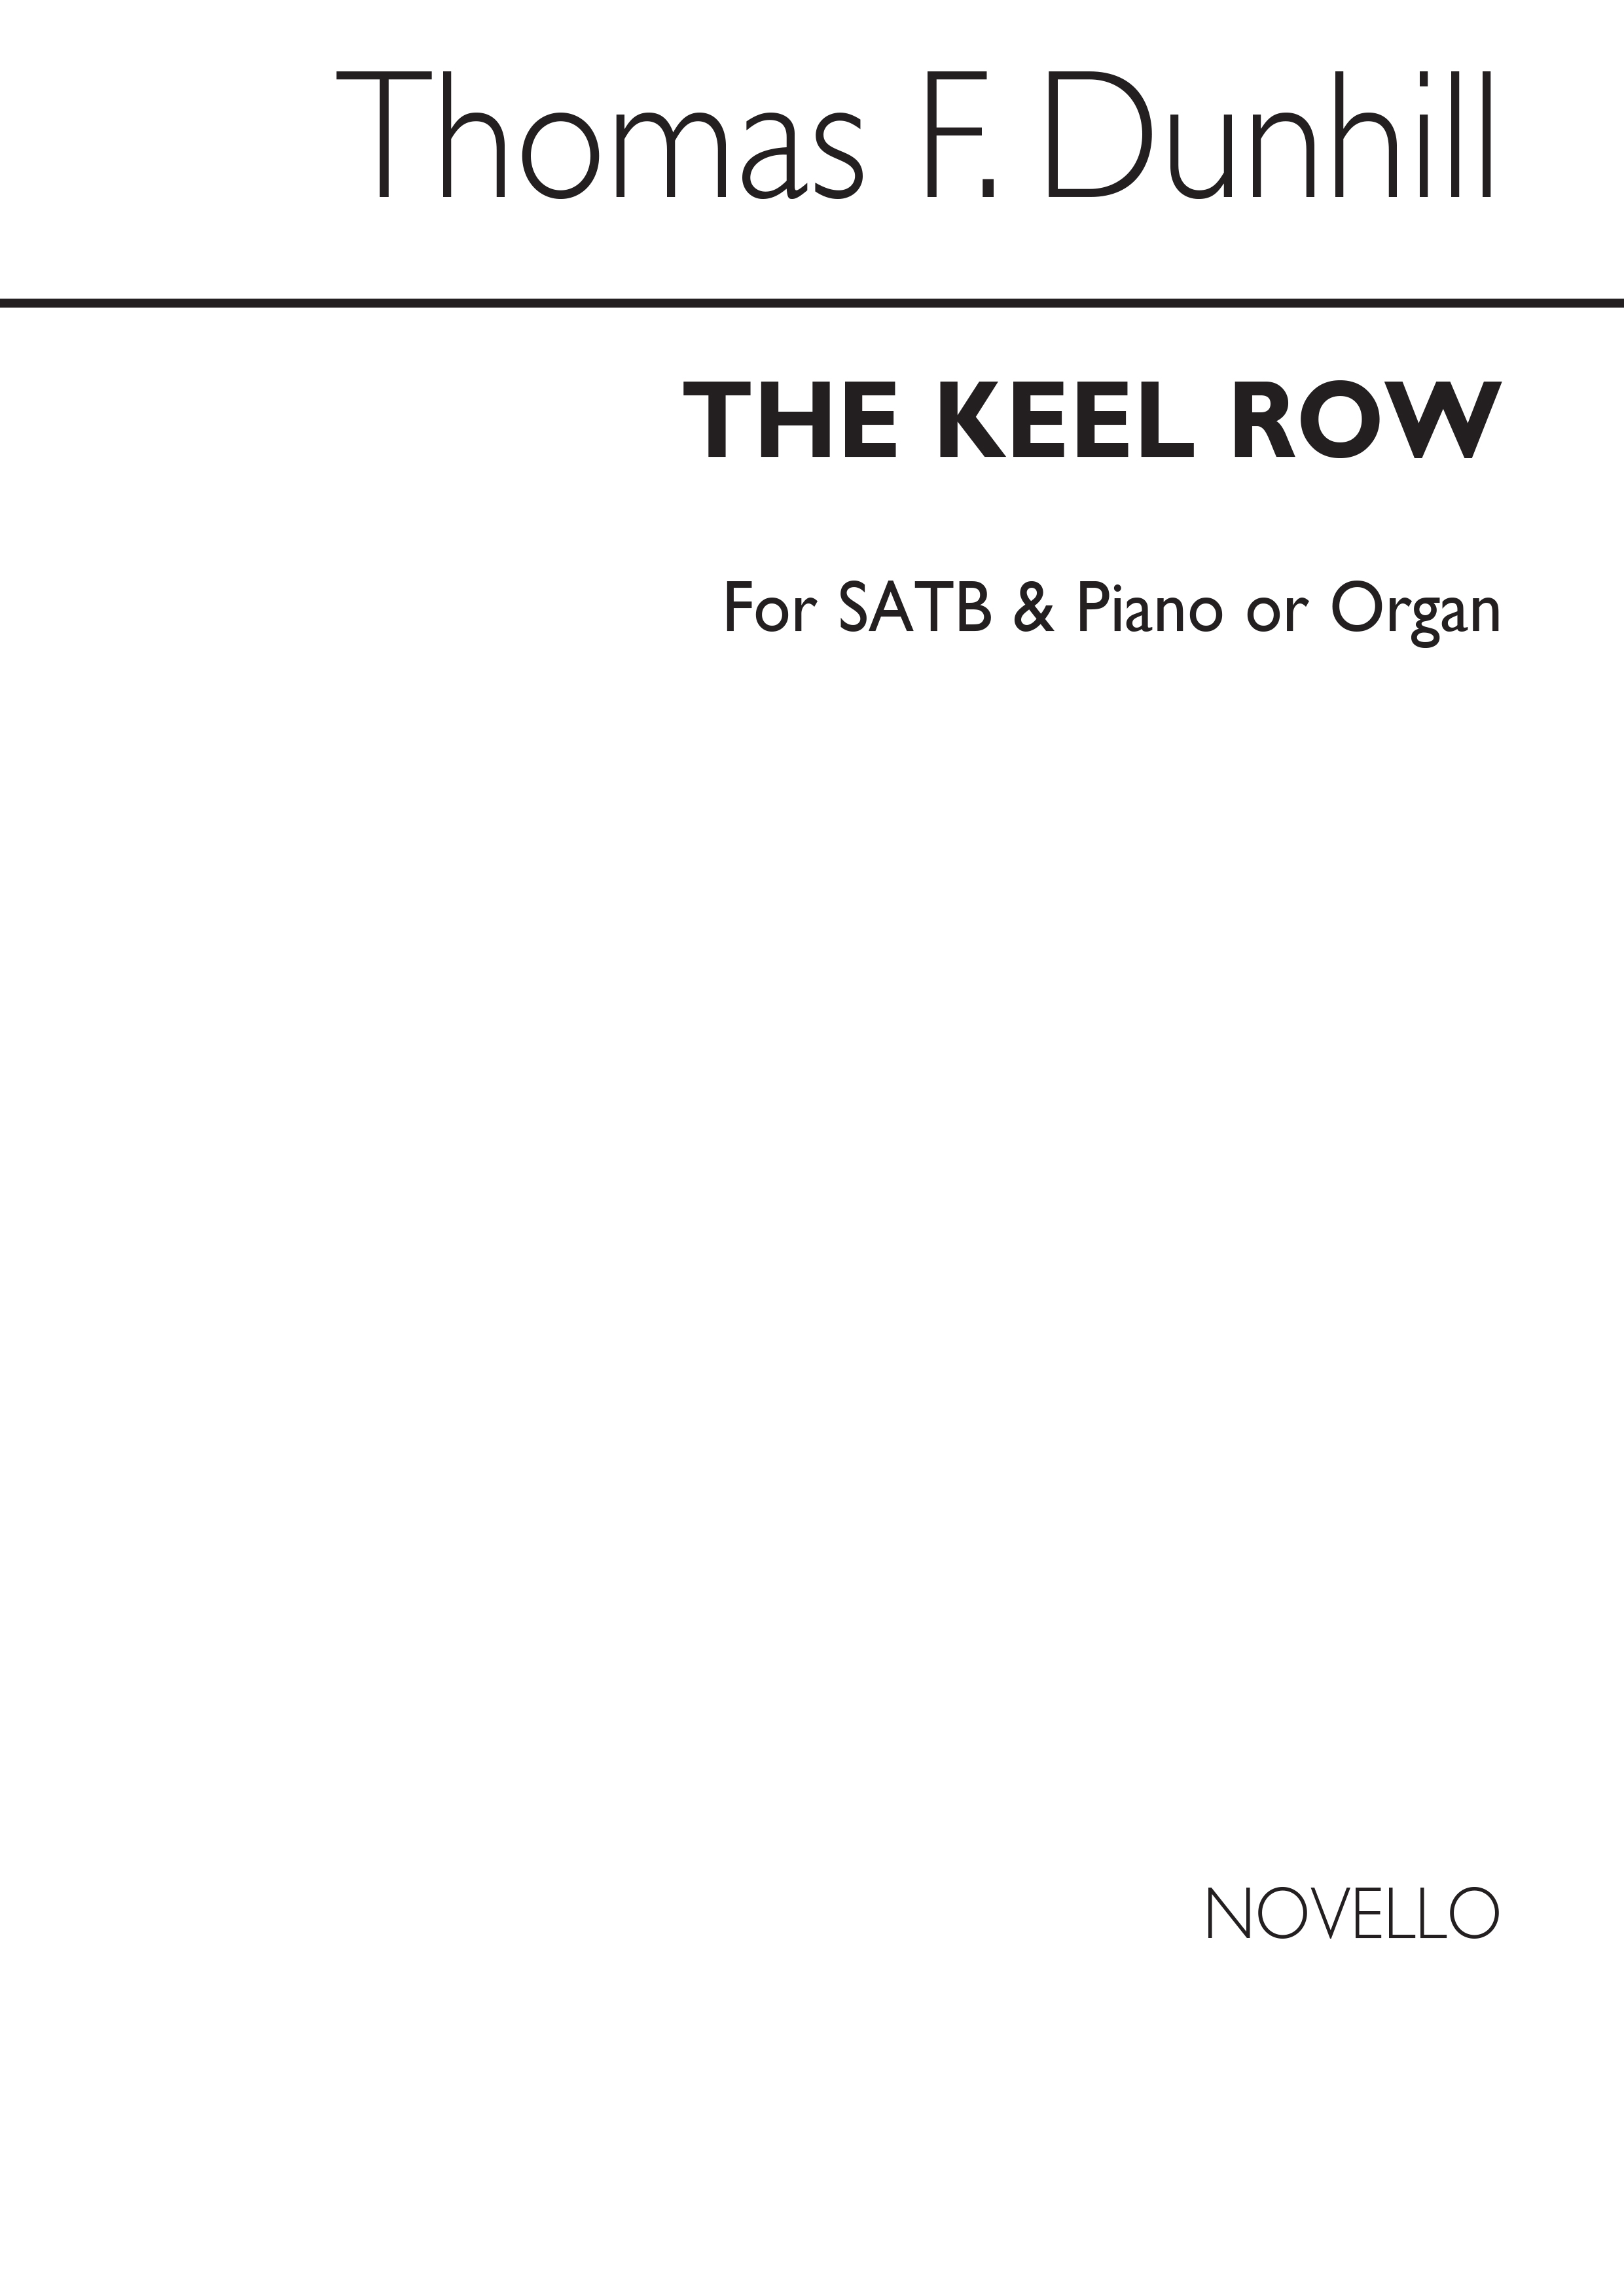 Thomas Dunhill: The Keel Row for SATB Chorus with accompaniment: SATB: Vocal